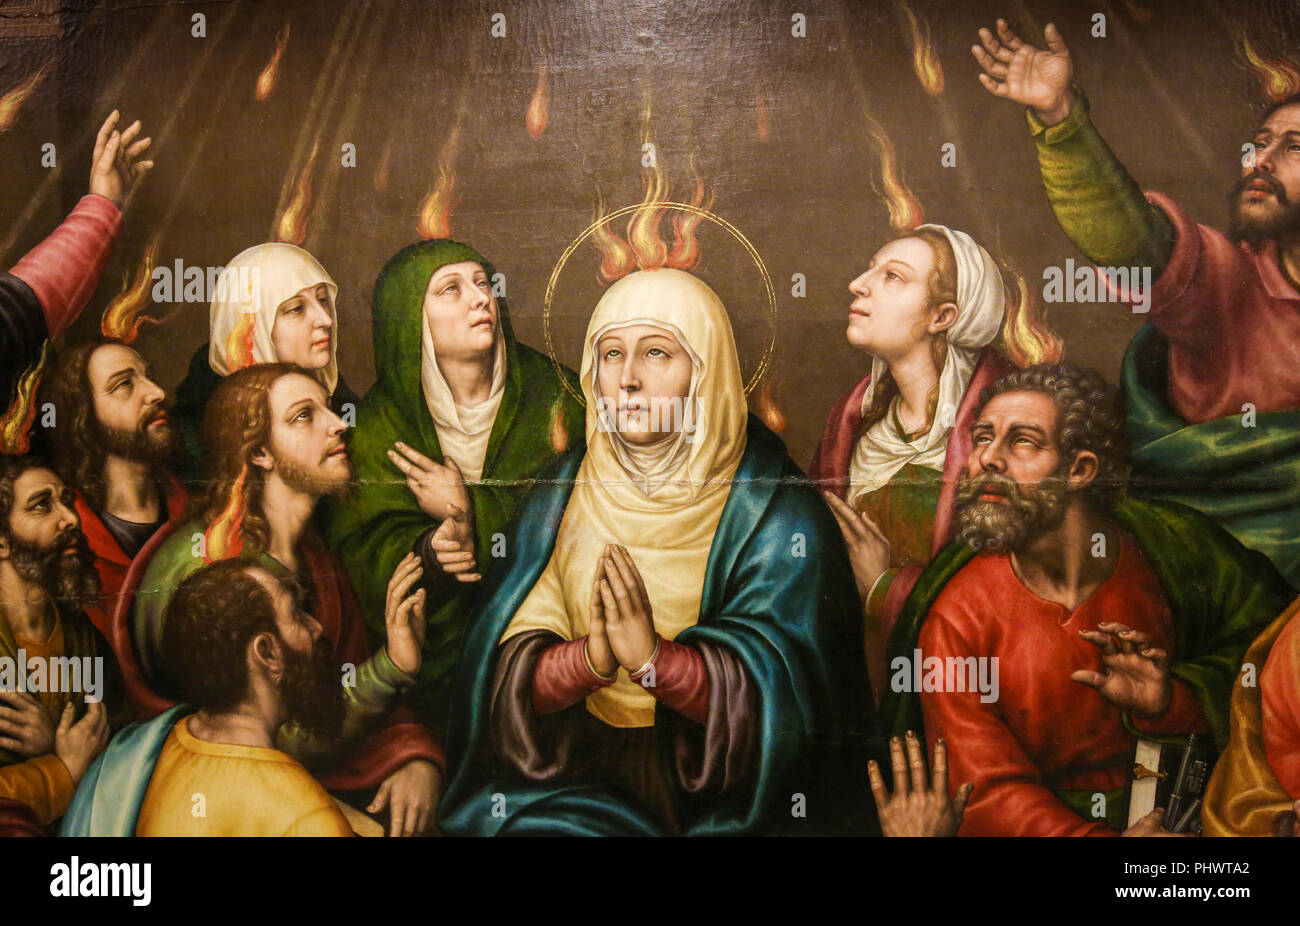 Painting of Mother Mary and the Apostles at Pentecost, in the Church of Valencia, Spain Stock Photo